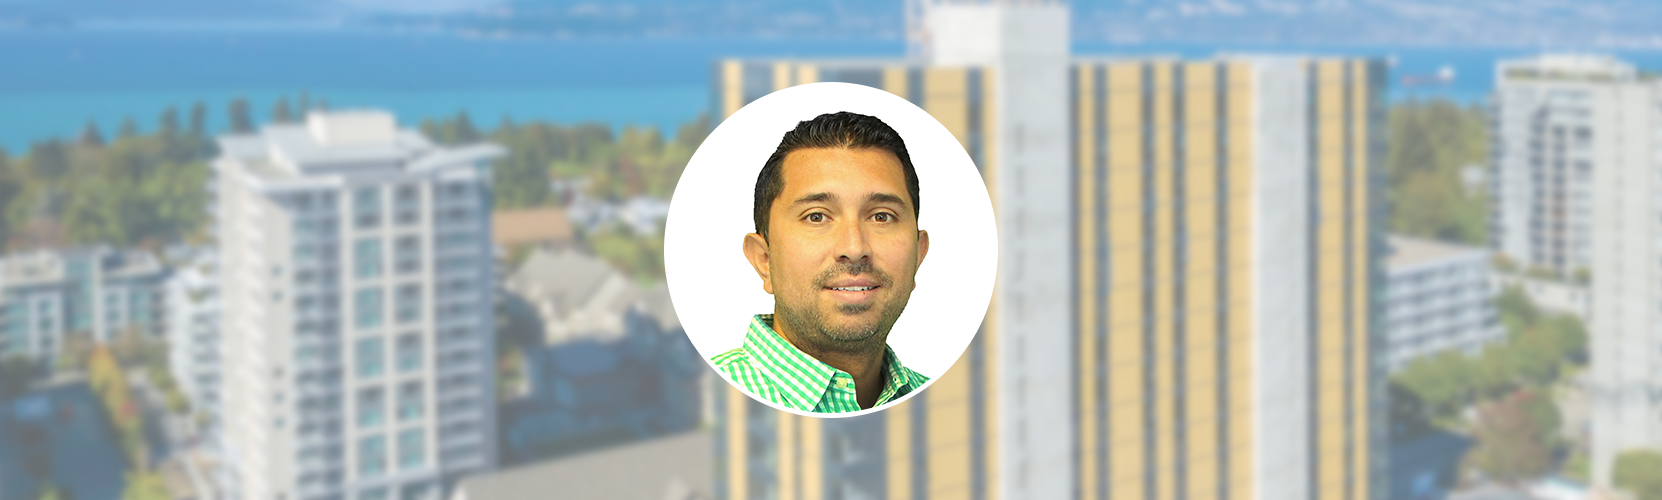 Q&A With Our New Architectural Solutions Representative Nicolas Vanegas